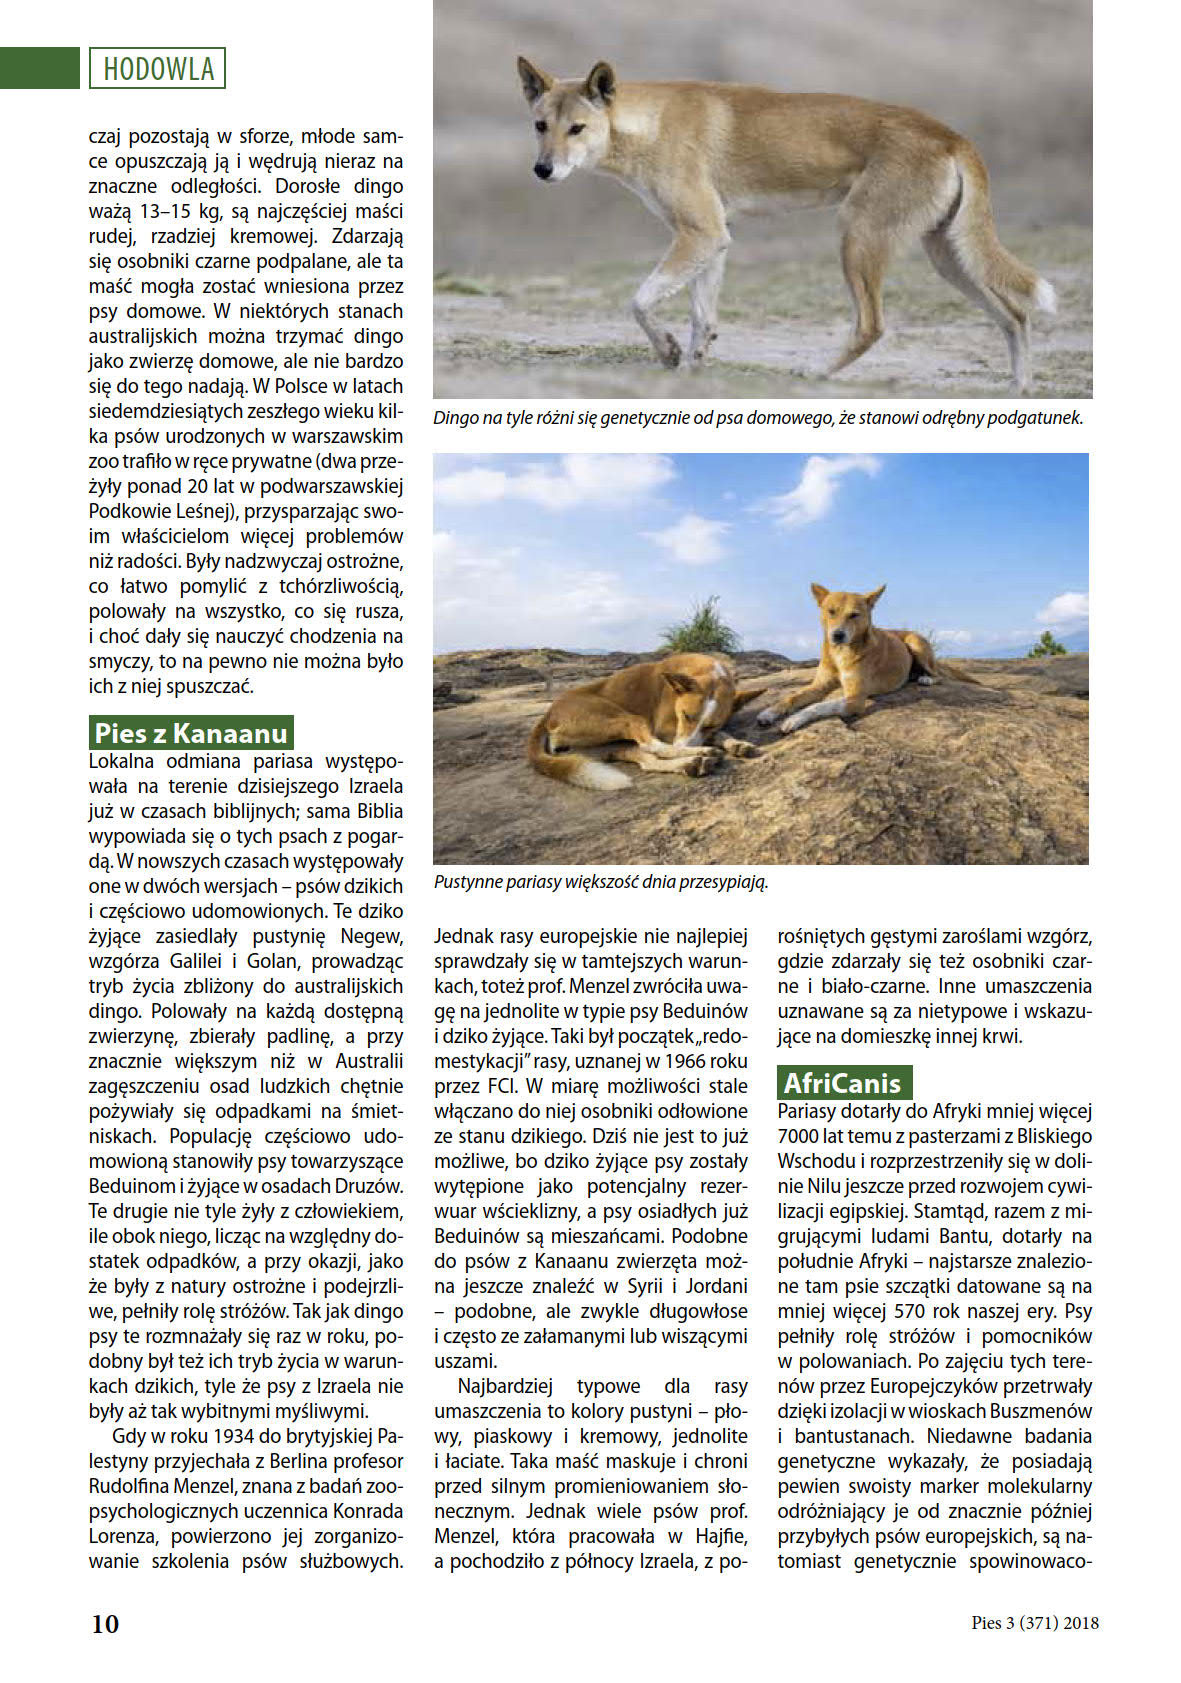 Article on primitive dogs, Polish Kennel Club magazine, August 2018